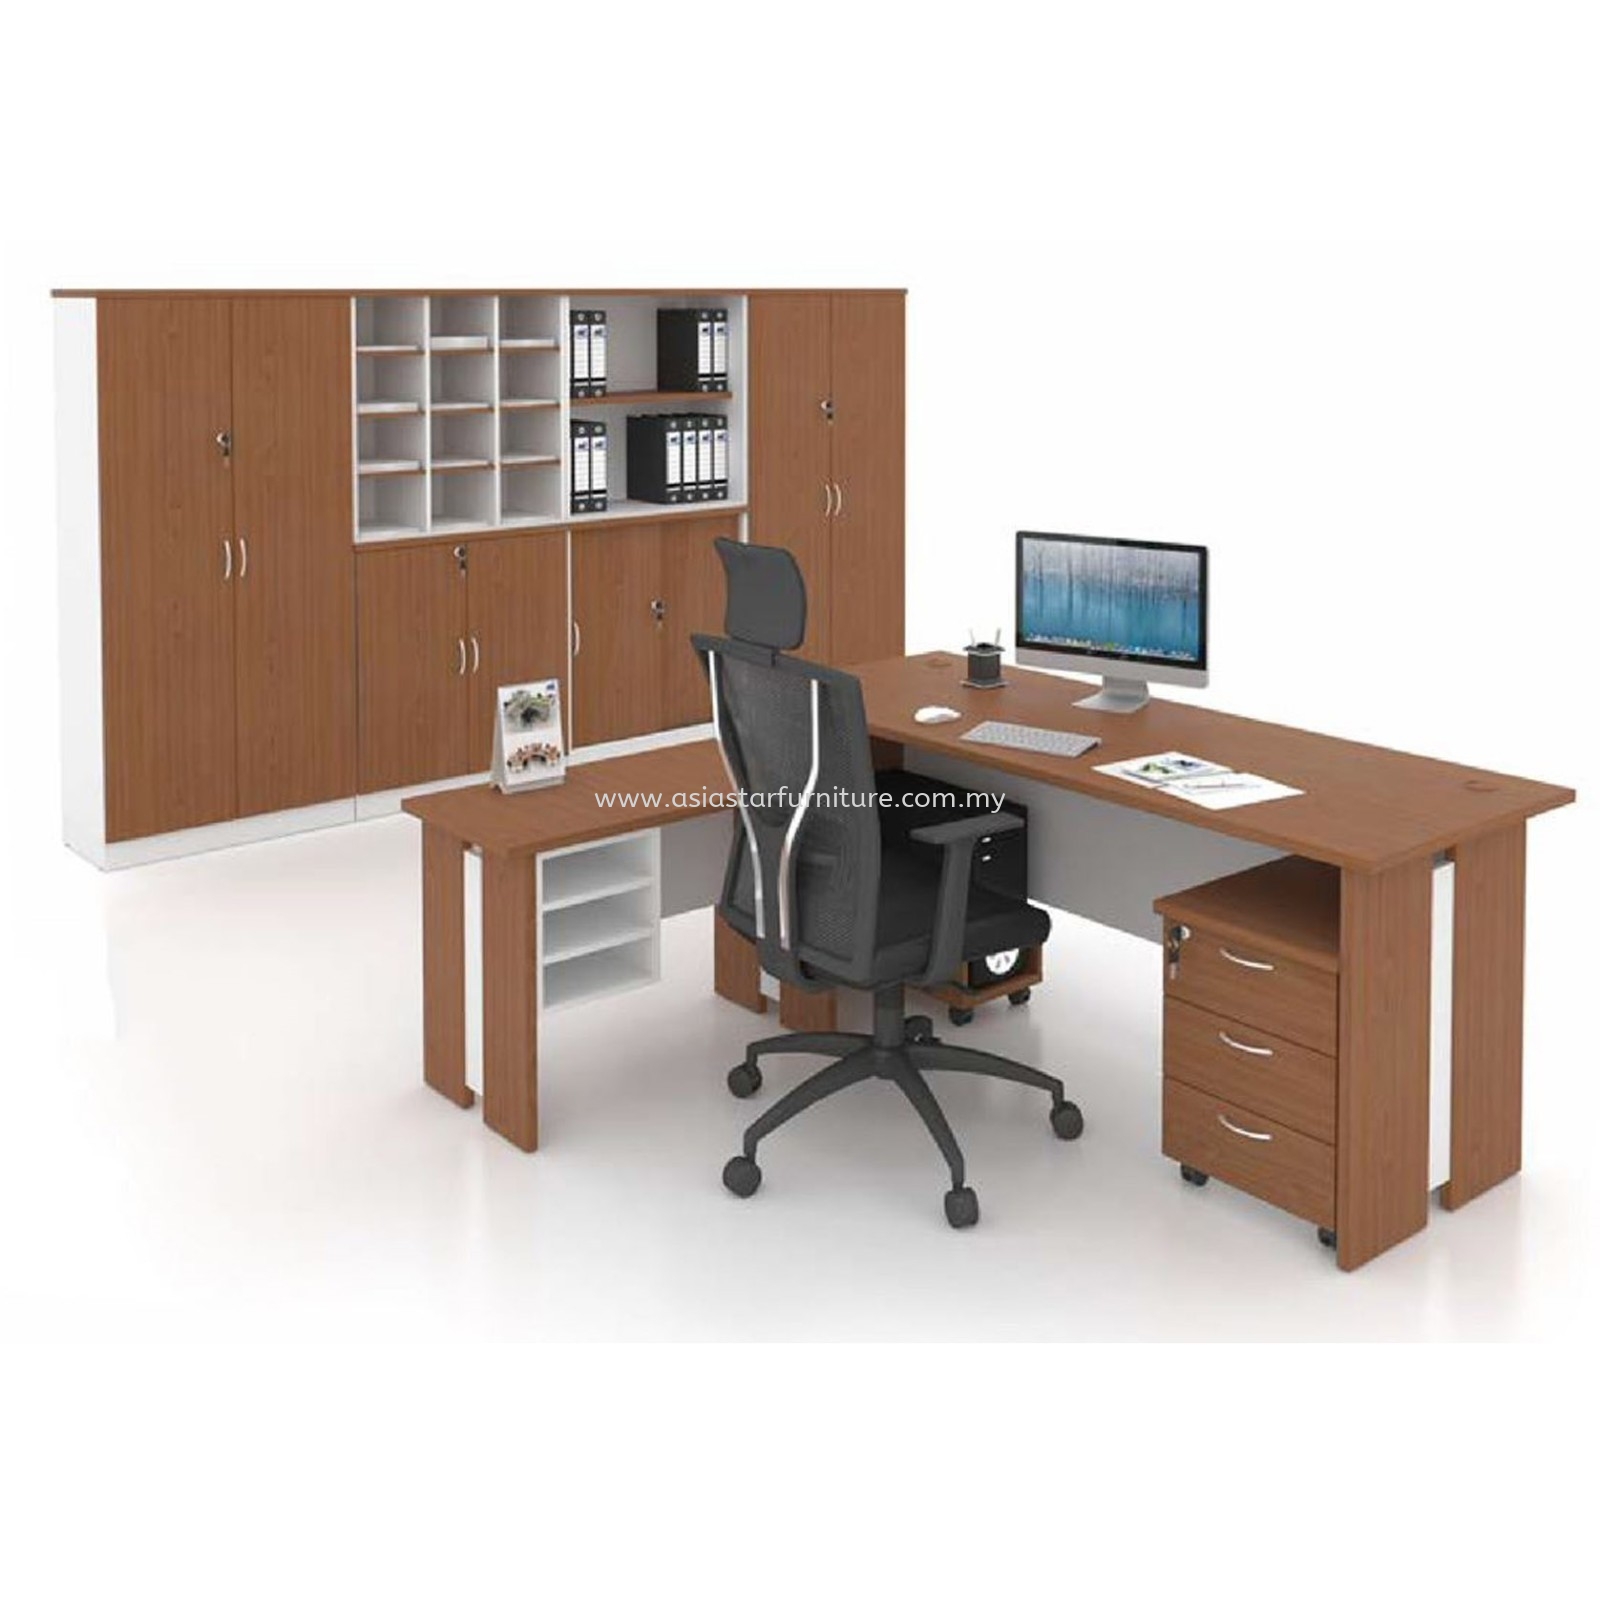 FAMAH 5' OFFICE TABLE C/W SIDE TABLE & MOBILE DRAWER WITH CABINET SET - office table set Segambut | office table set Sentul | office table set Brickfield | office table set Kl Eco City | office table set Seputeh